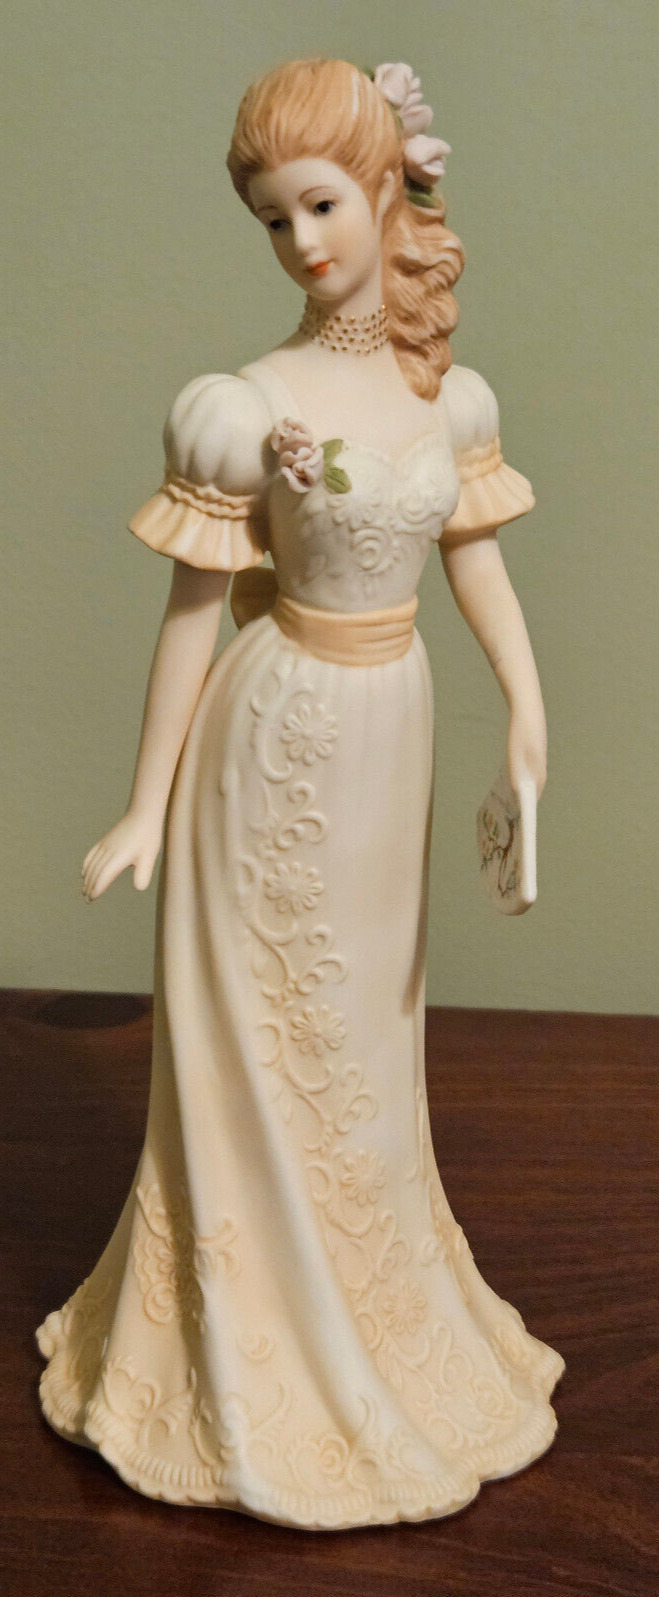 Masterpiece Porcelain By Homco Home Interiors VICTORIA Signed Figurine 1991